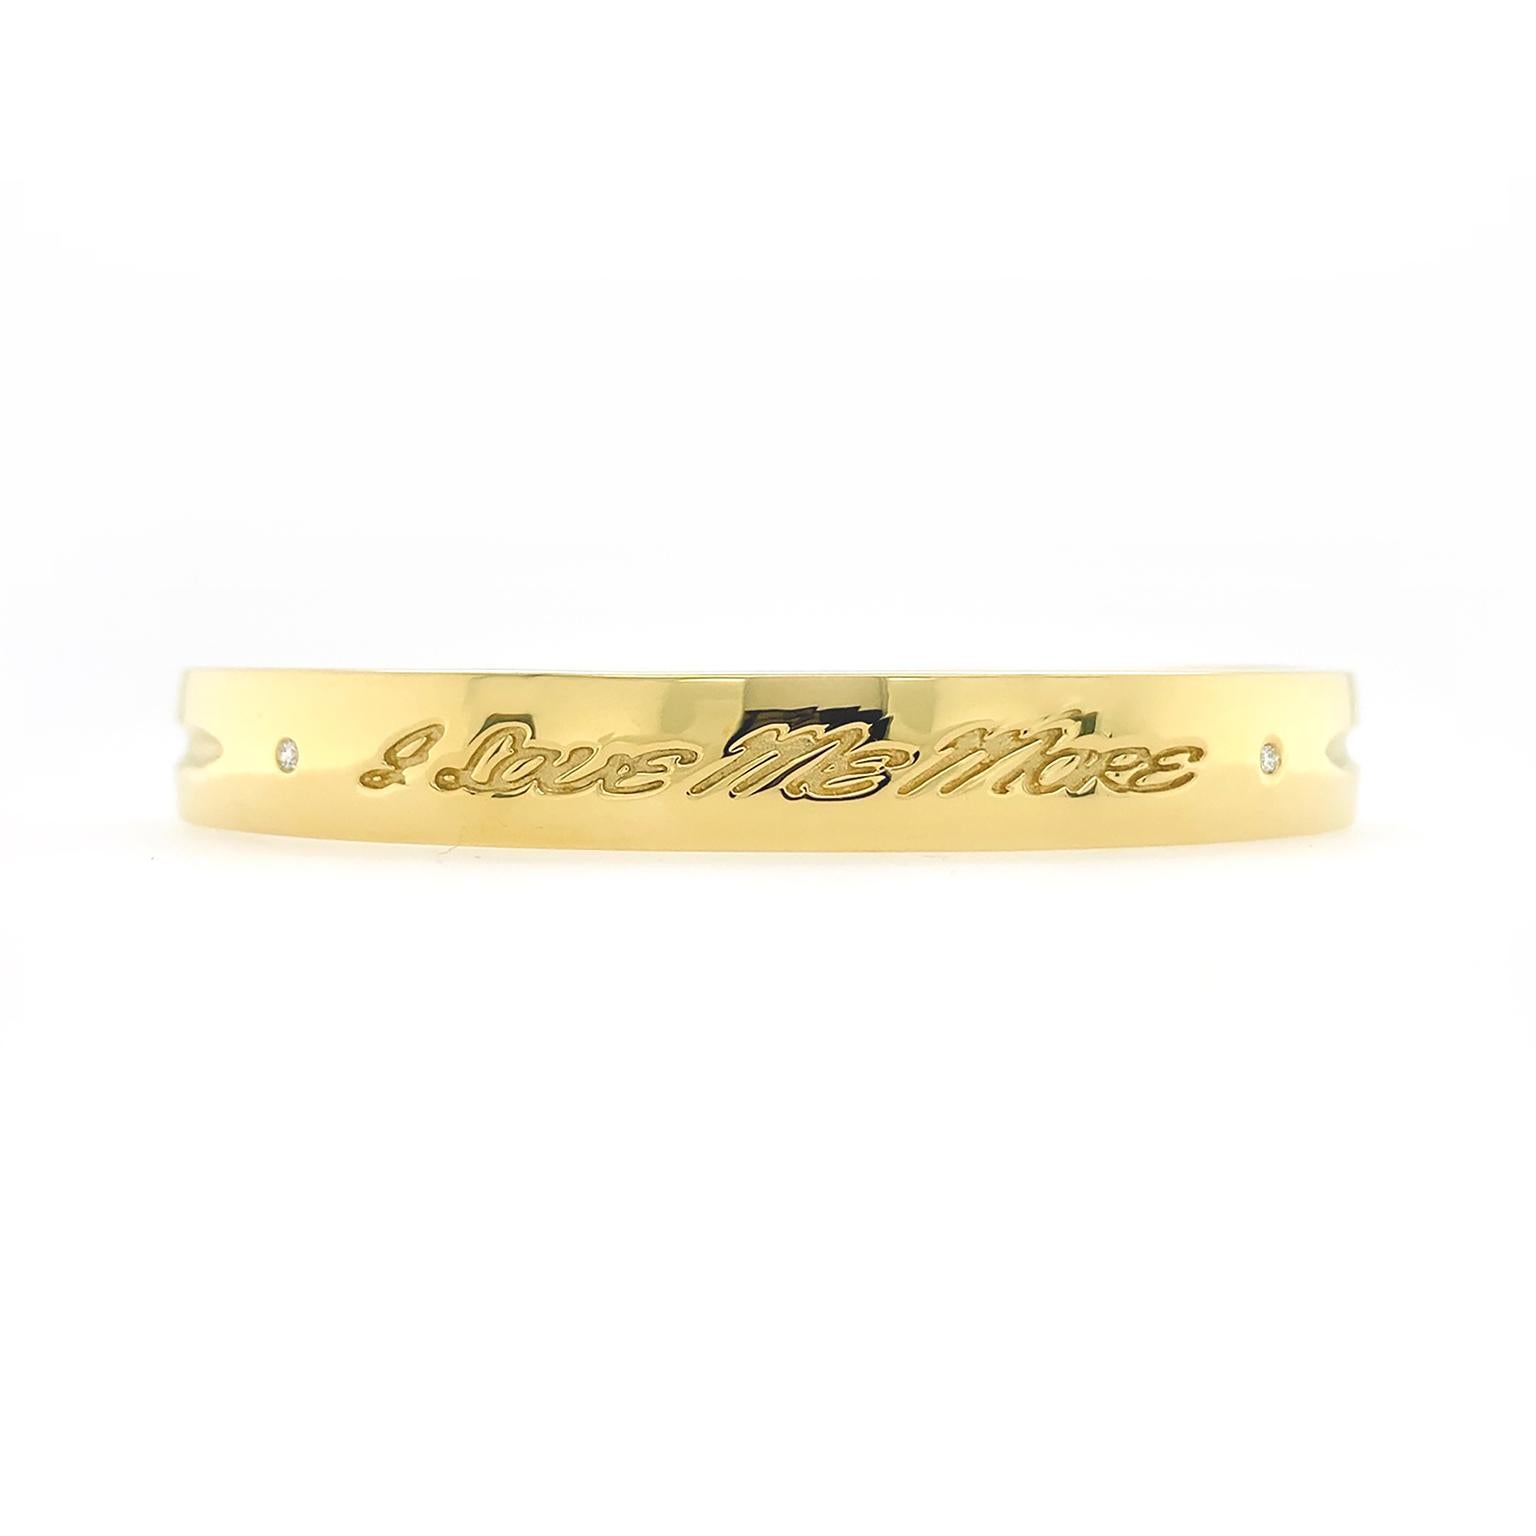 Diamonds highlight this bracelet’s message. The base is an 18k yellow-gold bangle with hinges for ease of wearing. Two round brilliant cut diamonds are burnish set into the bracelet, their tops level with the gold’s surface. The phrase 'I love me